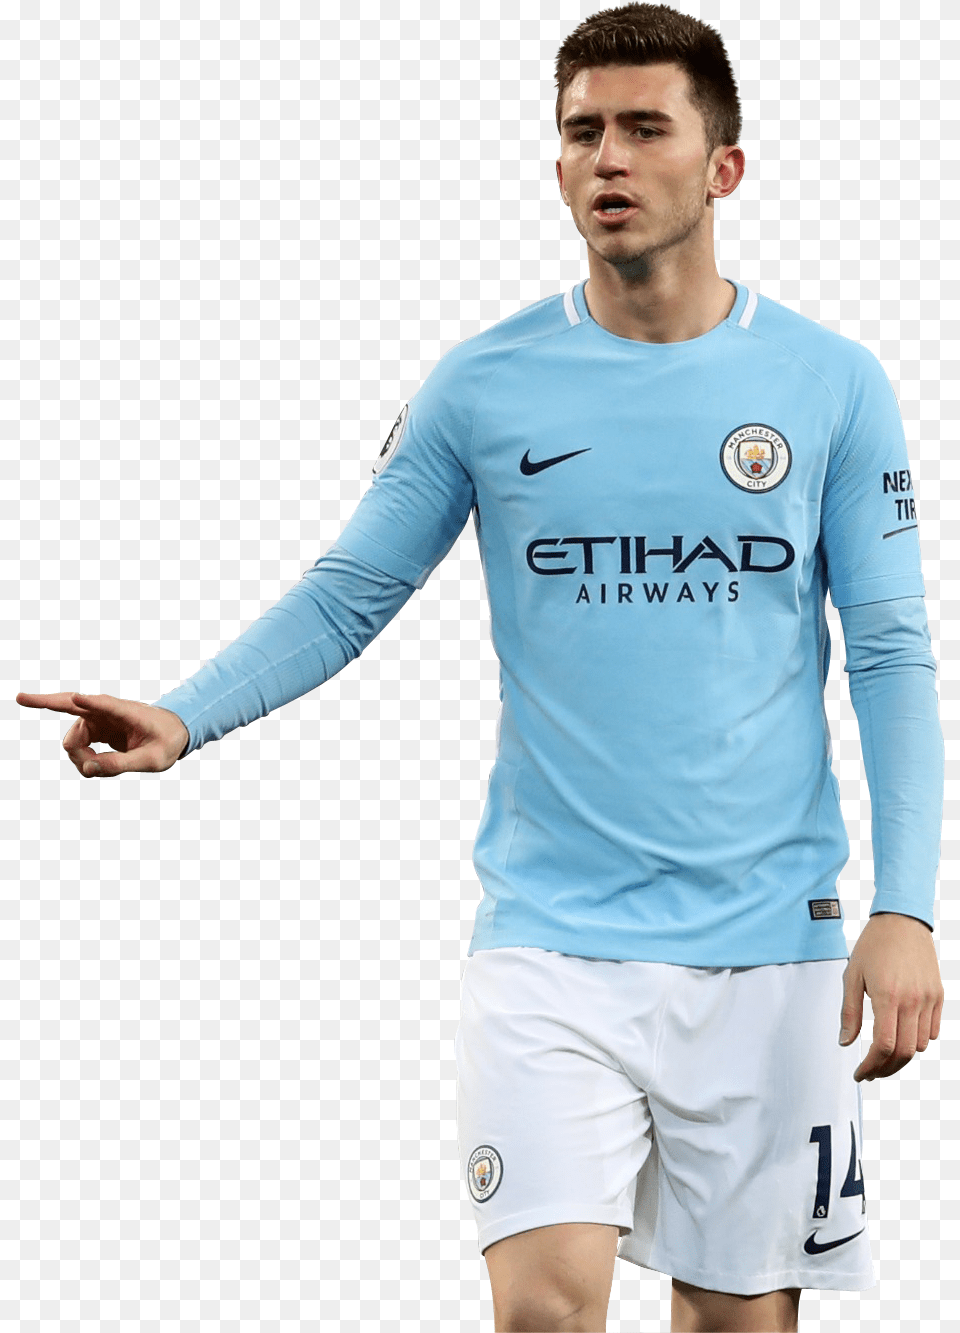 Aymeric Laporte Render Aymeric Laporte, Clothing, Shirt, Adult, Person Png Image